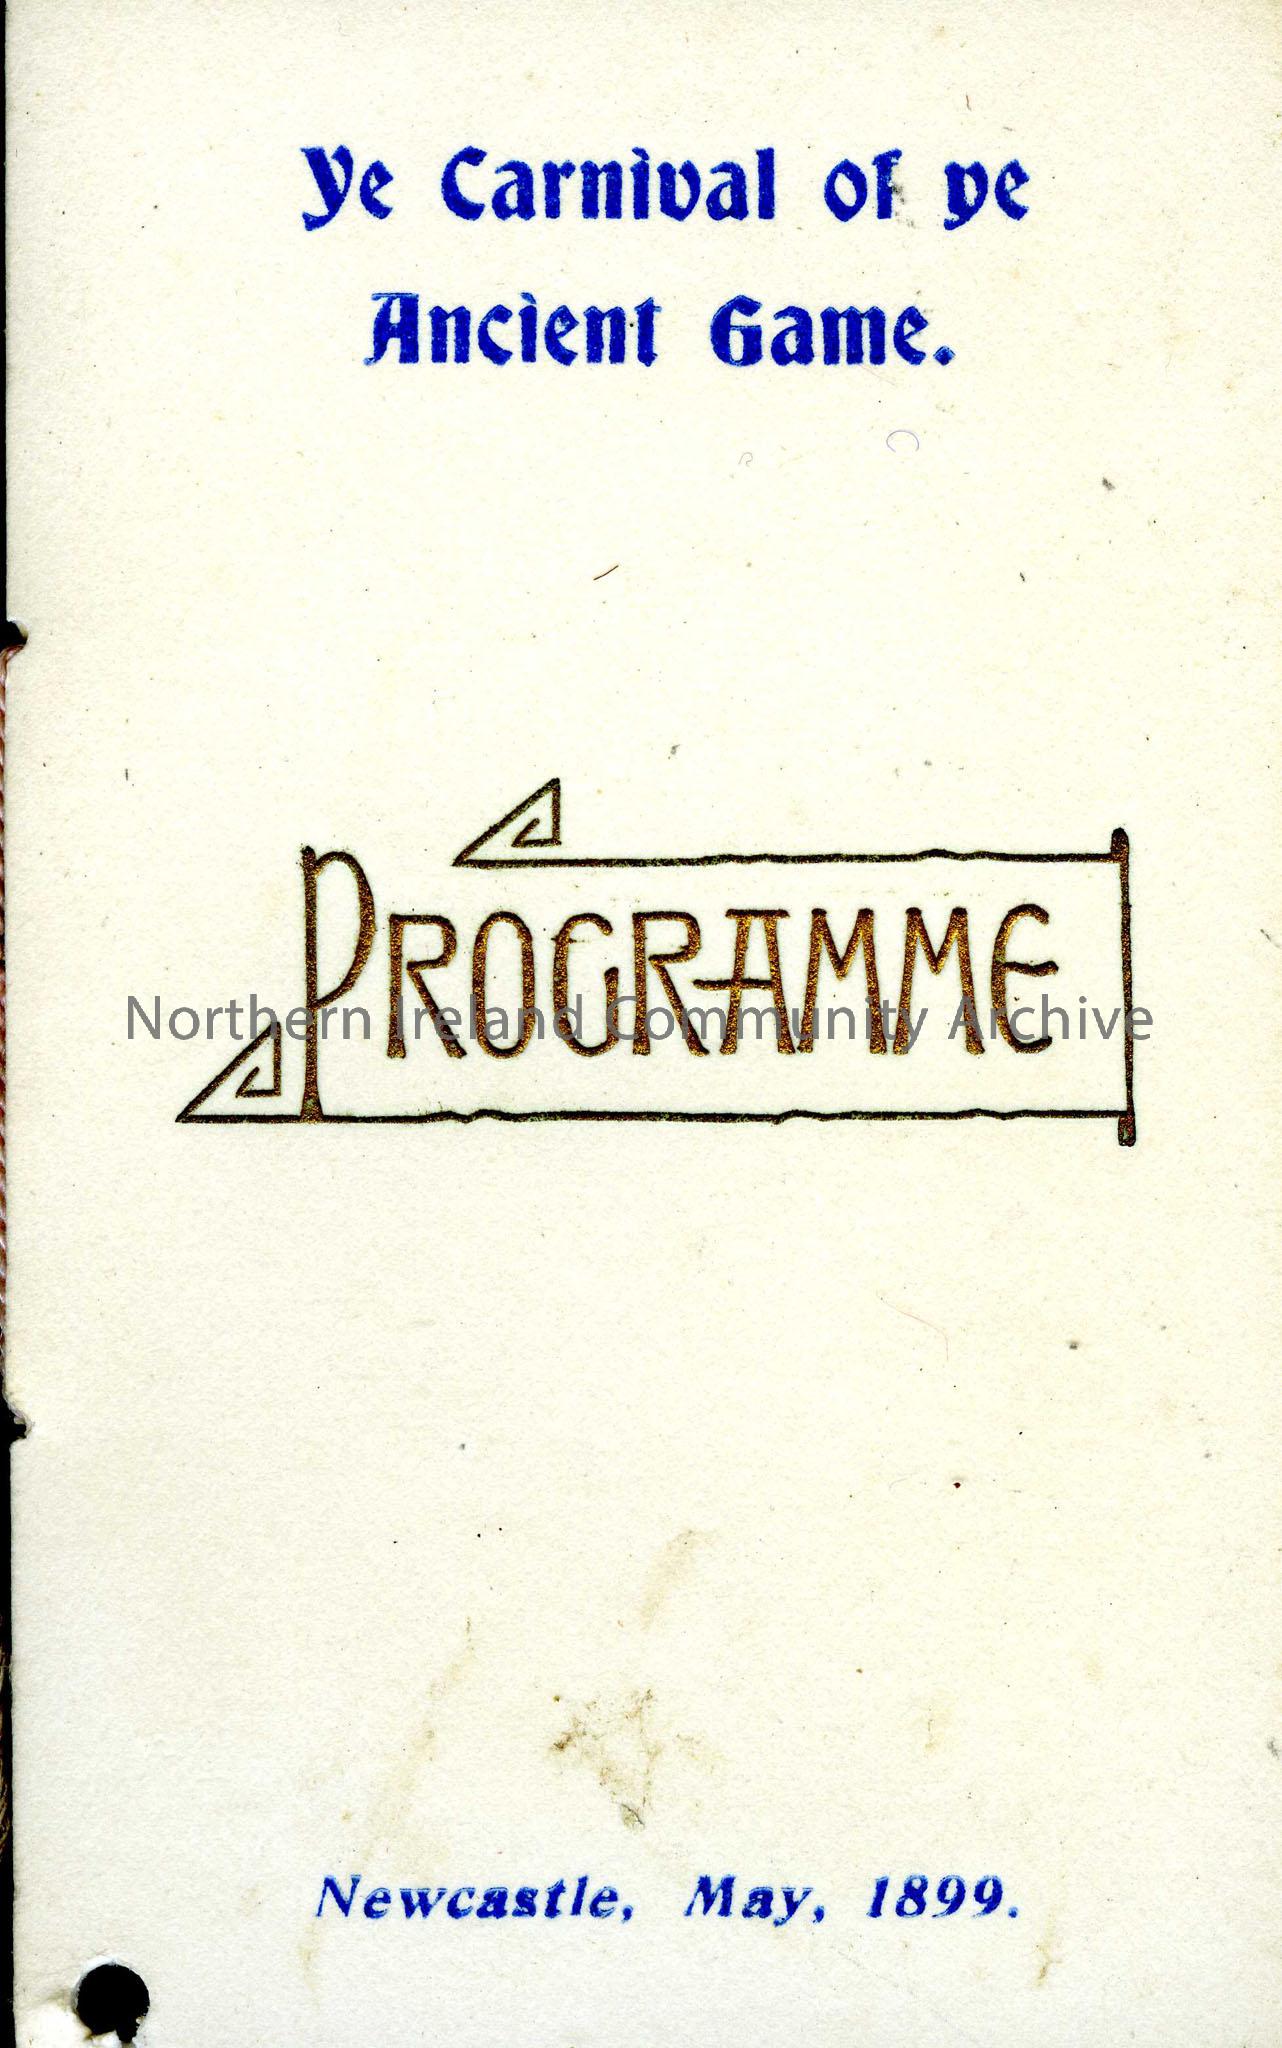 Dance card or programme.  Ye Carnival of ye Ancient Game. Newcastle, May 1899. Names inside.